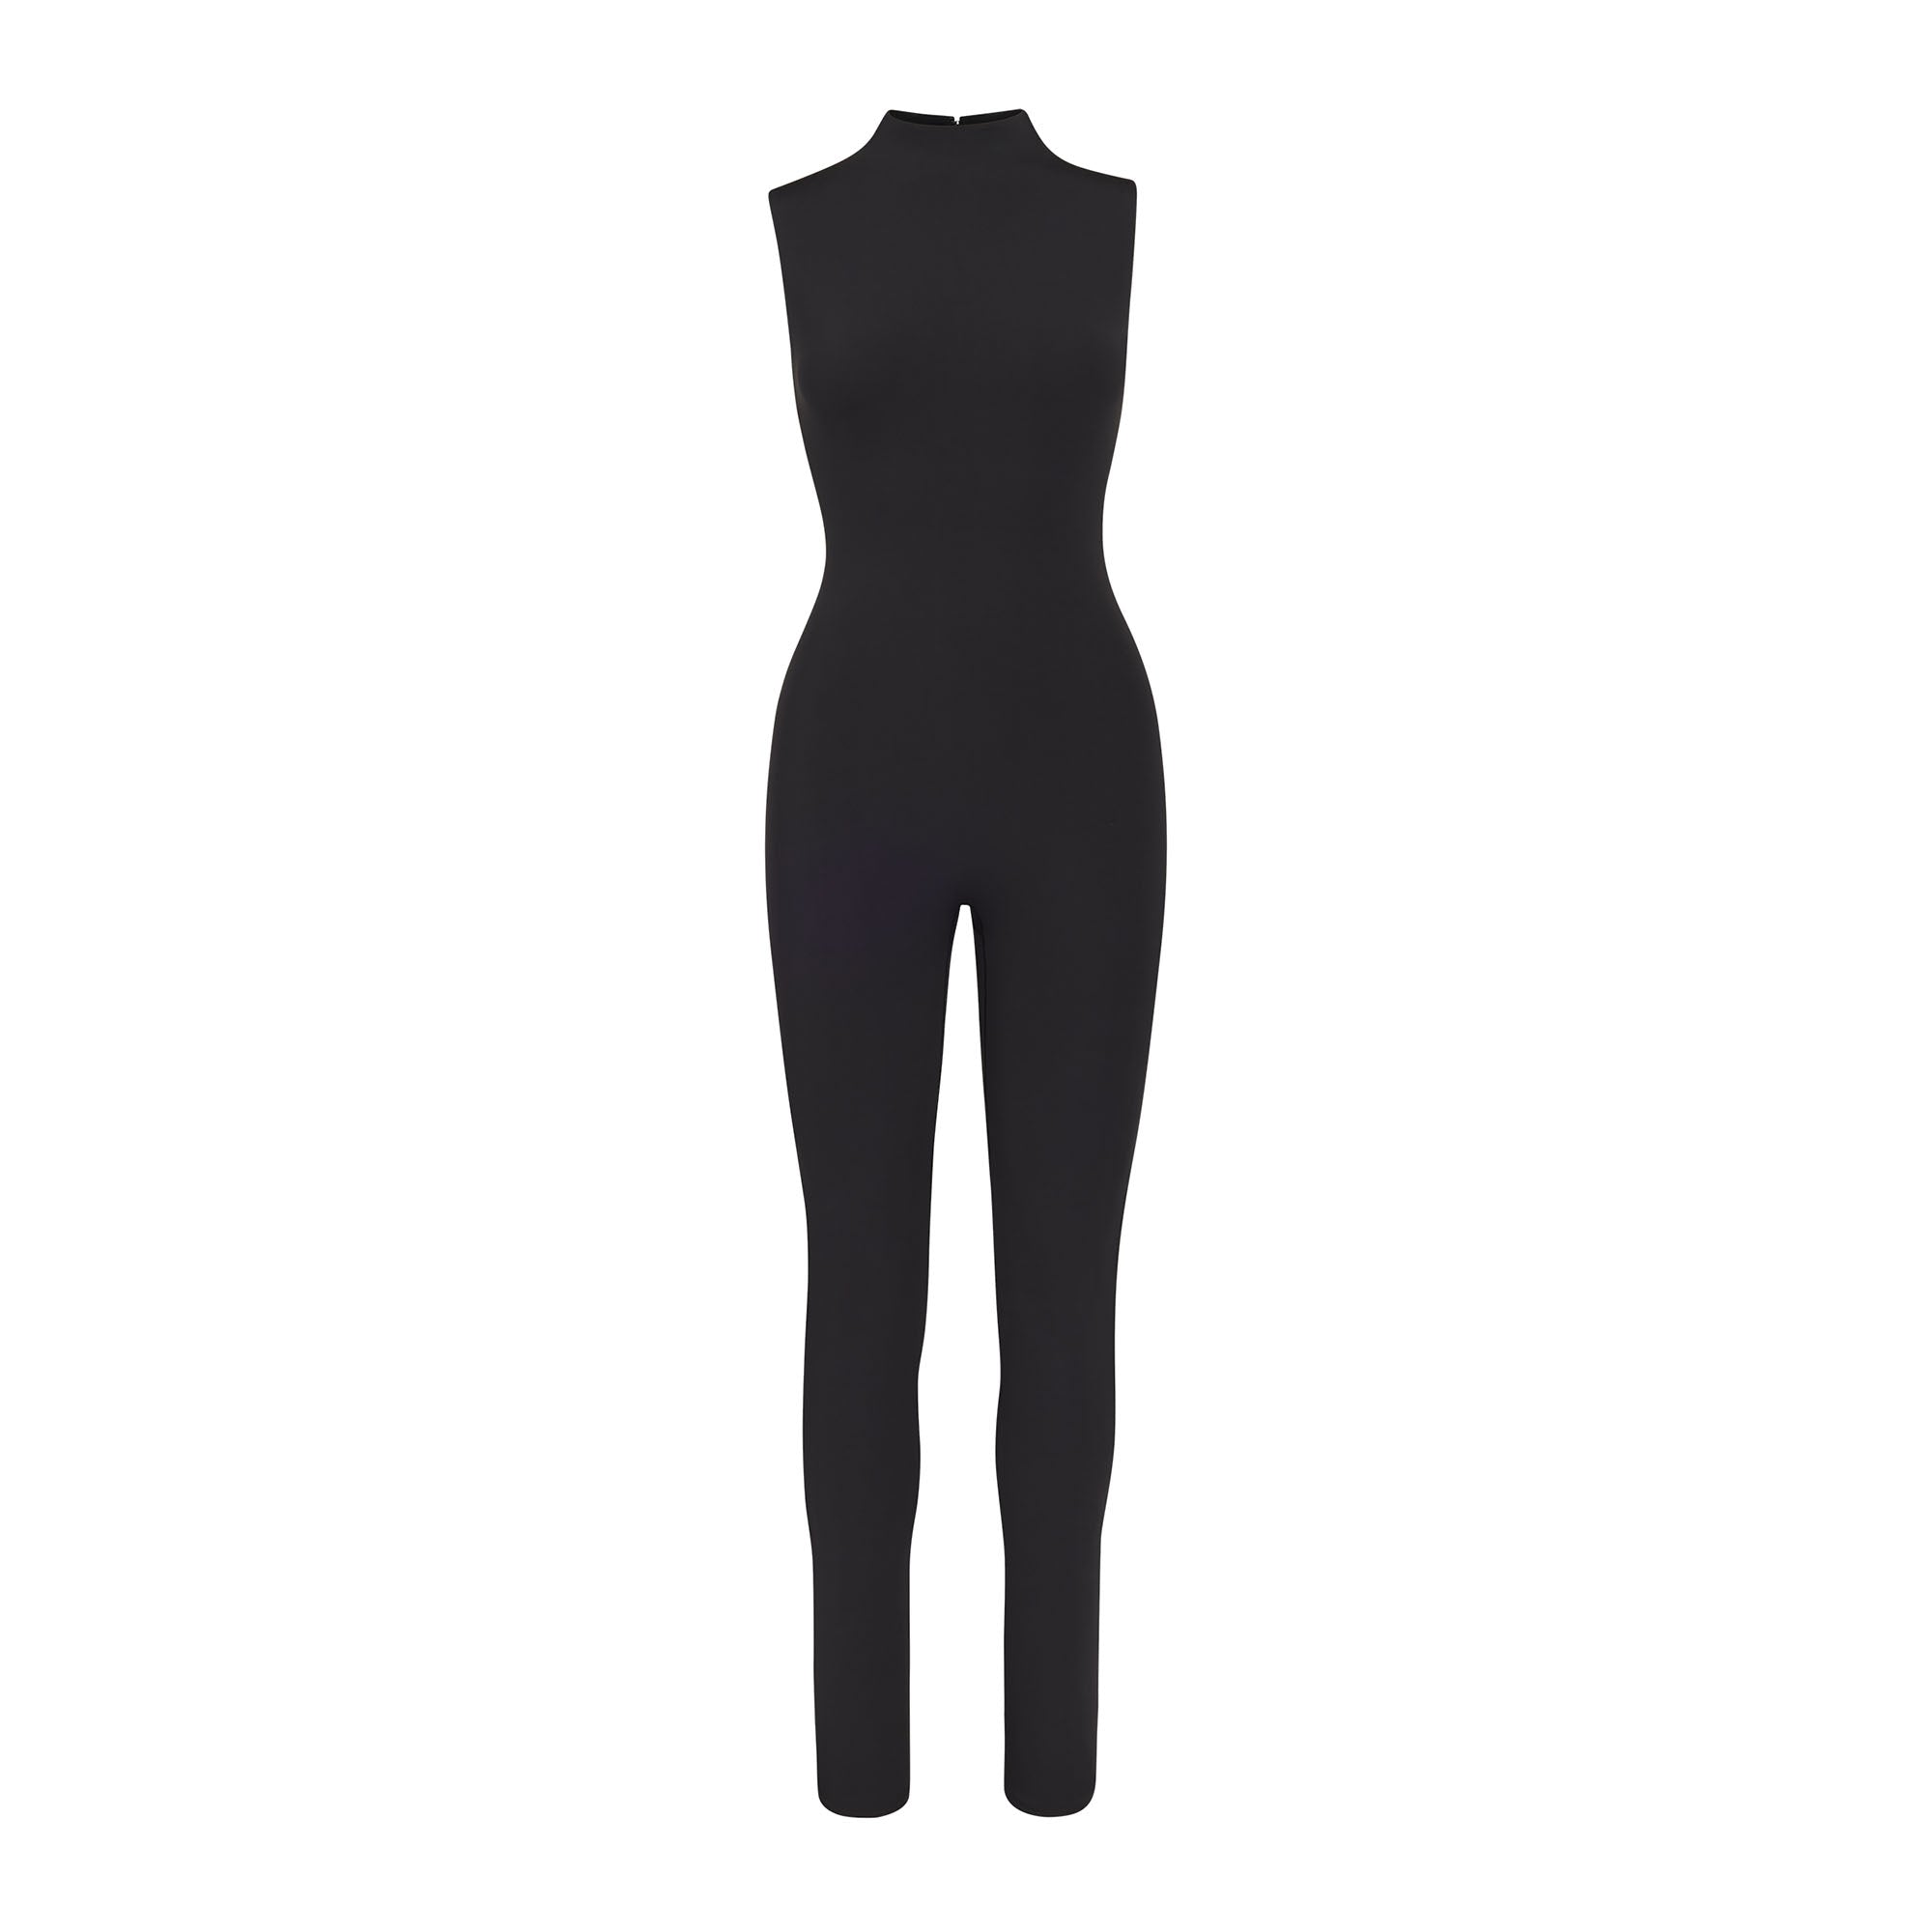 SKIMS All In One Shine Square Neck Onesie Catsuit Black Size 2X - $98 (23%  Off Retail) - From Brownide